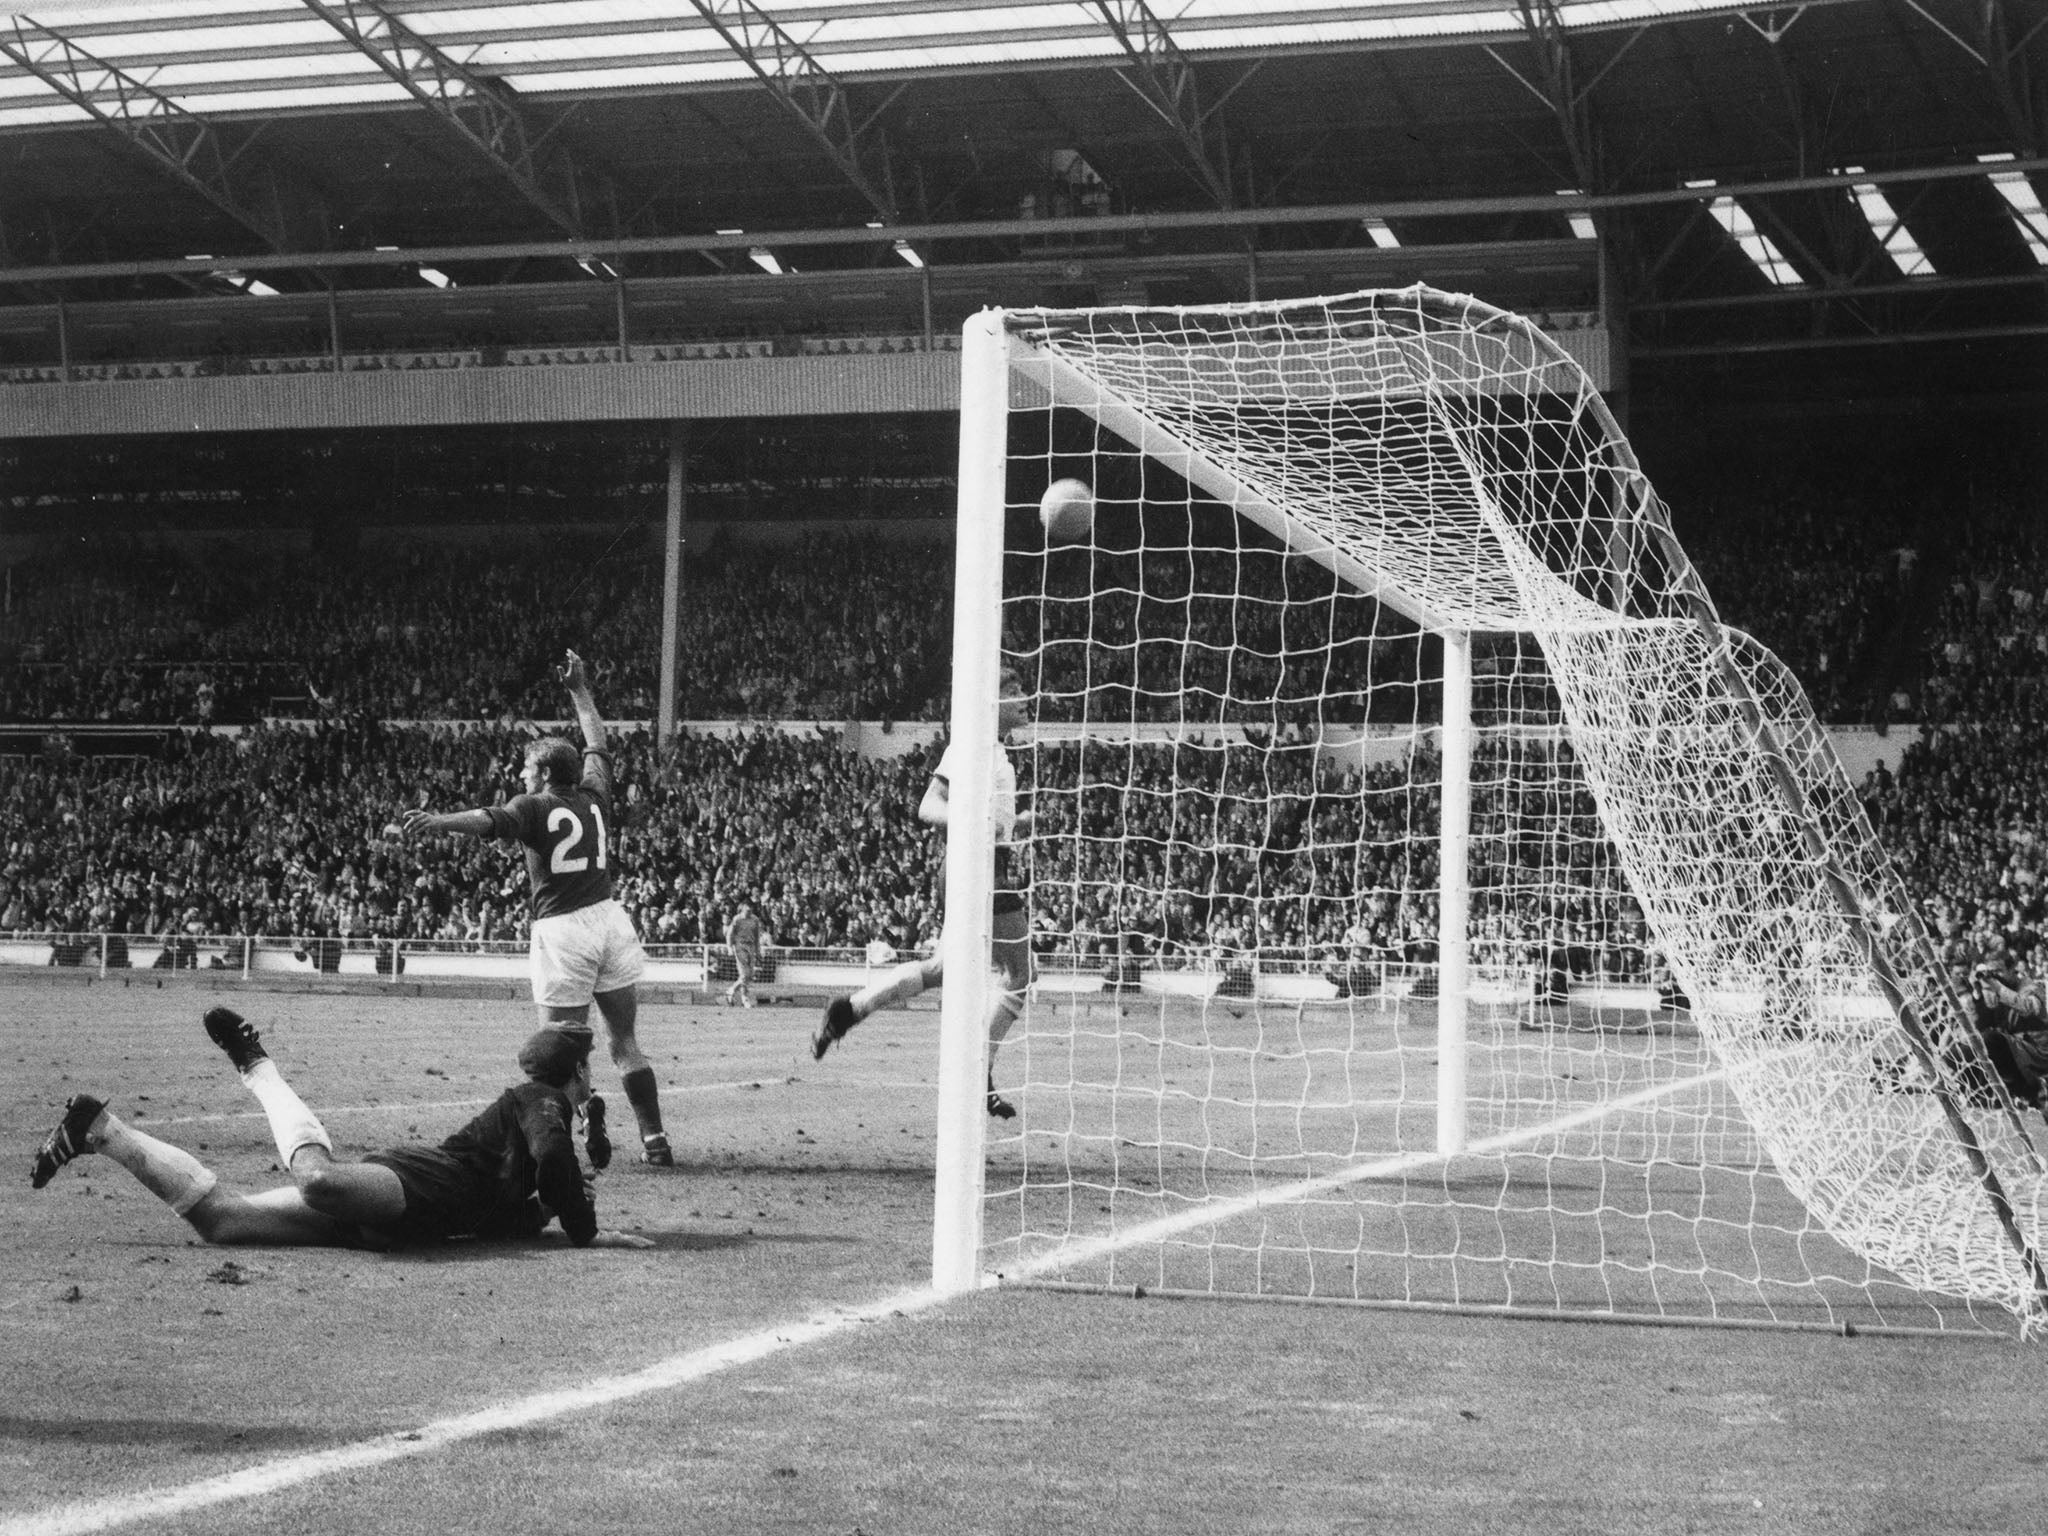 1966 and all that: England’s lone World Cup victory, and the disputed Geoff Hurst goal